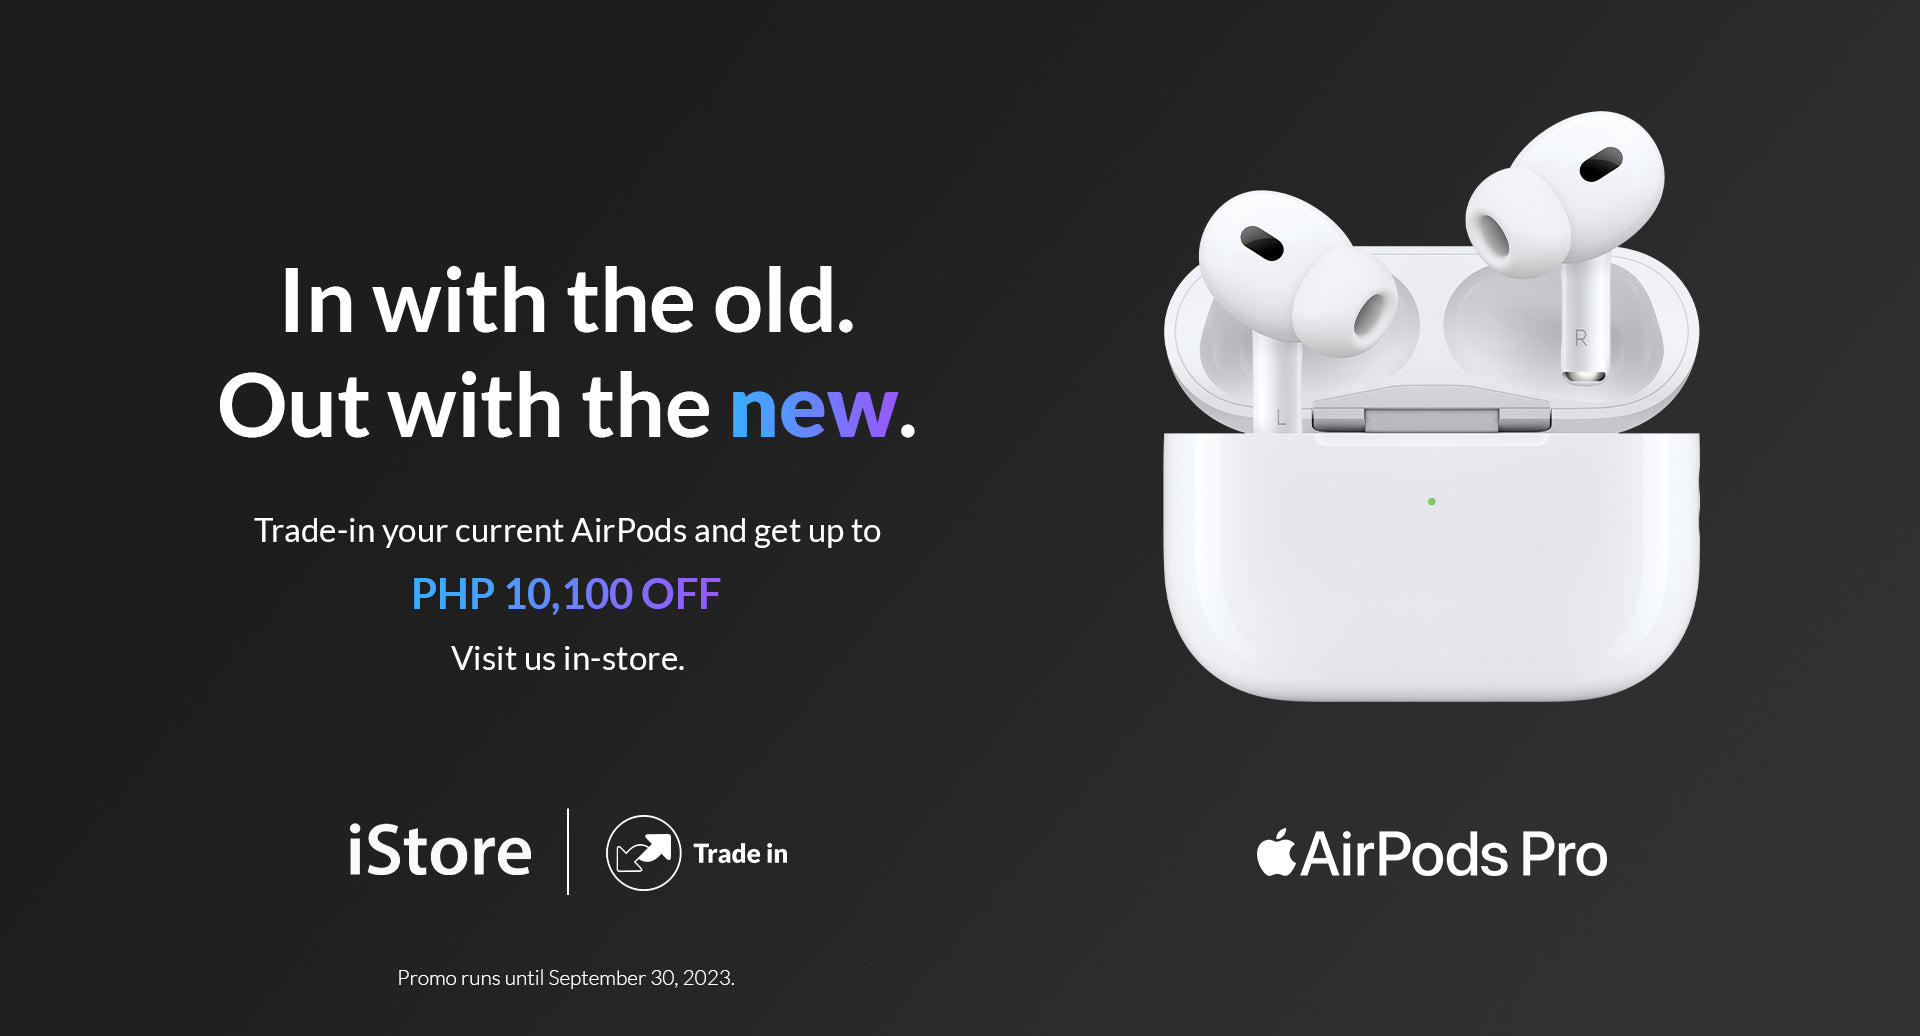 Trade-in your current AirPods with exclusive savings!